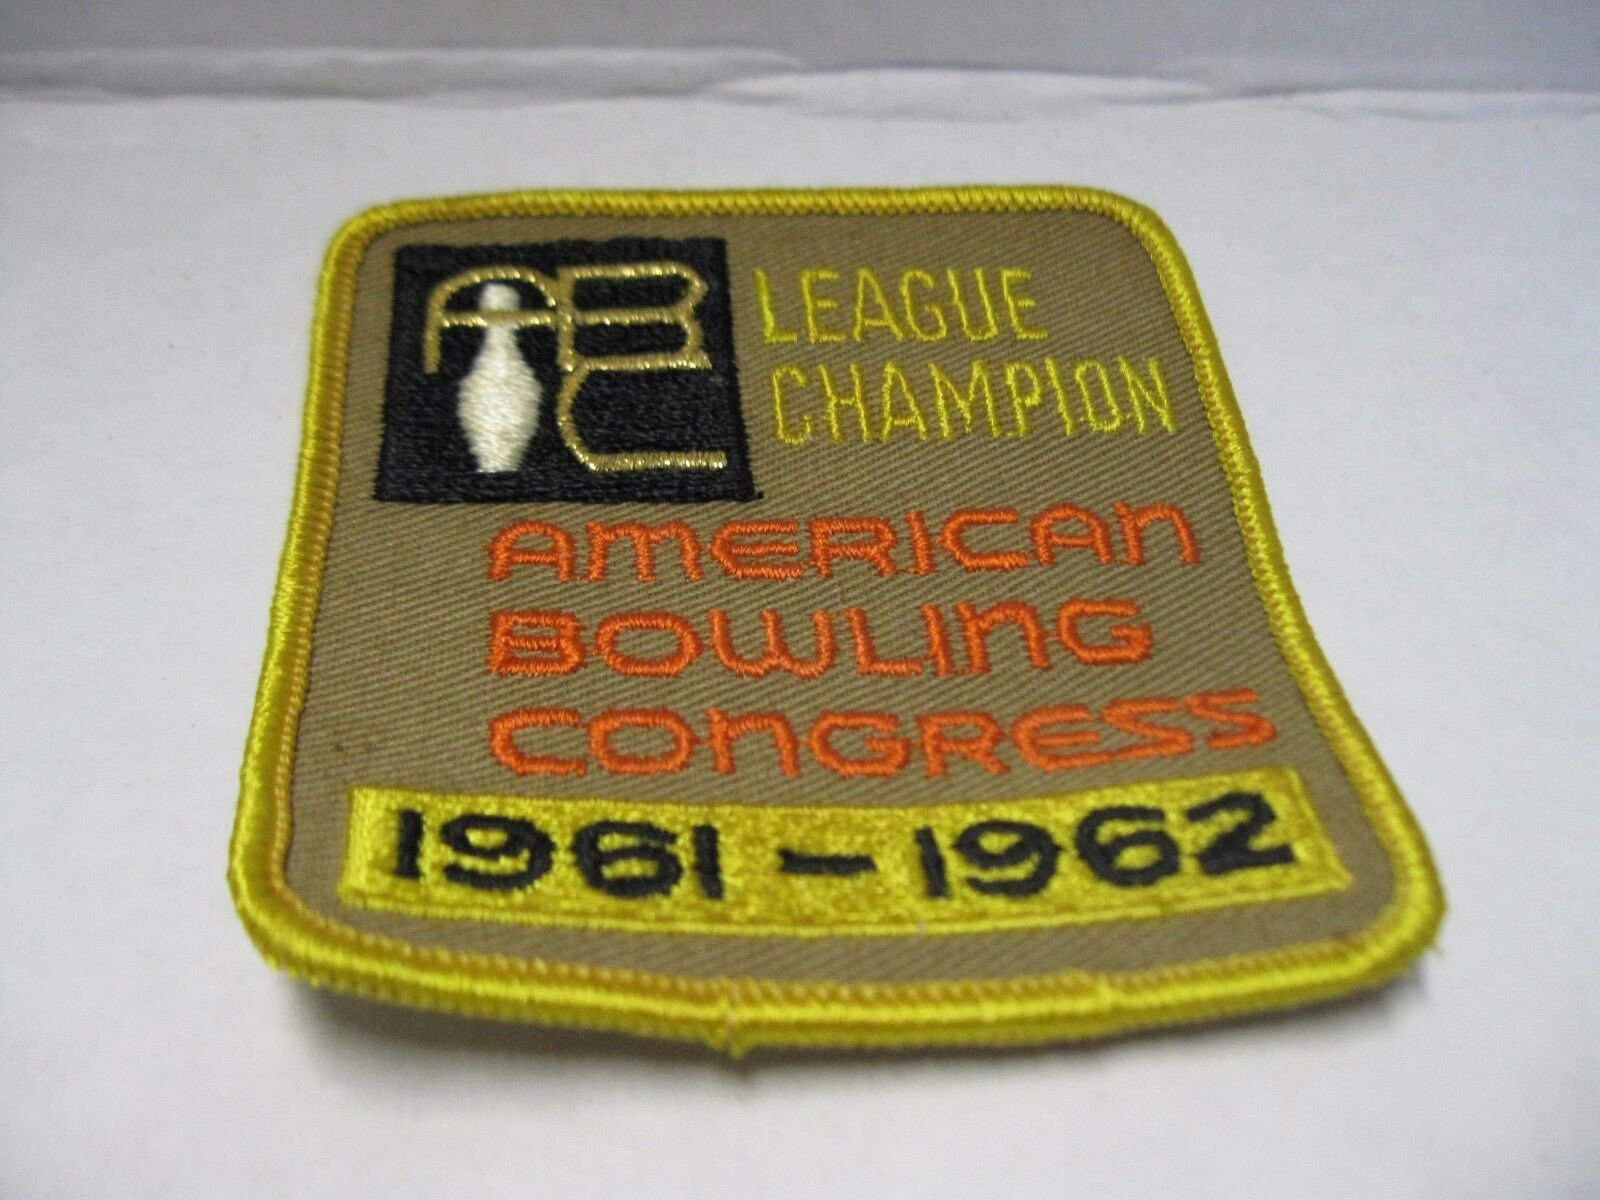 VINTAGE 1961-1962 League Champion BOWLING PATCH American Bowling Congress Unused